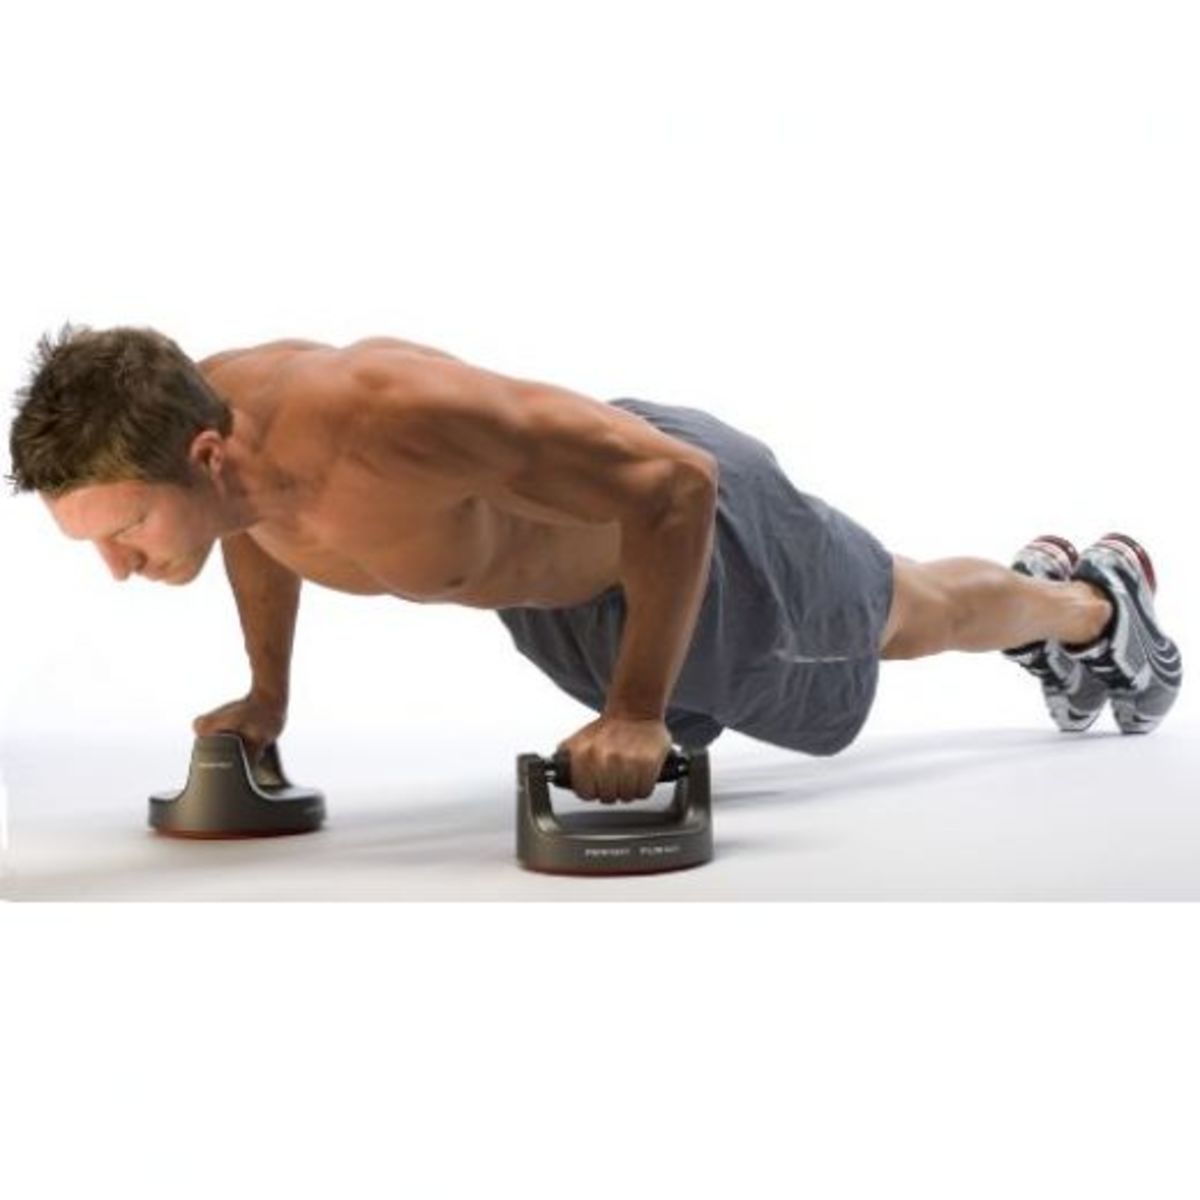 Variations of Pushups -- Incline and Decline Pushups